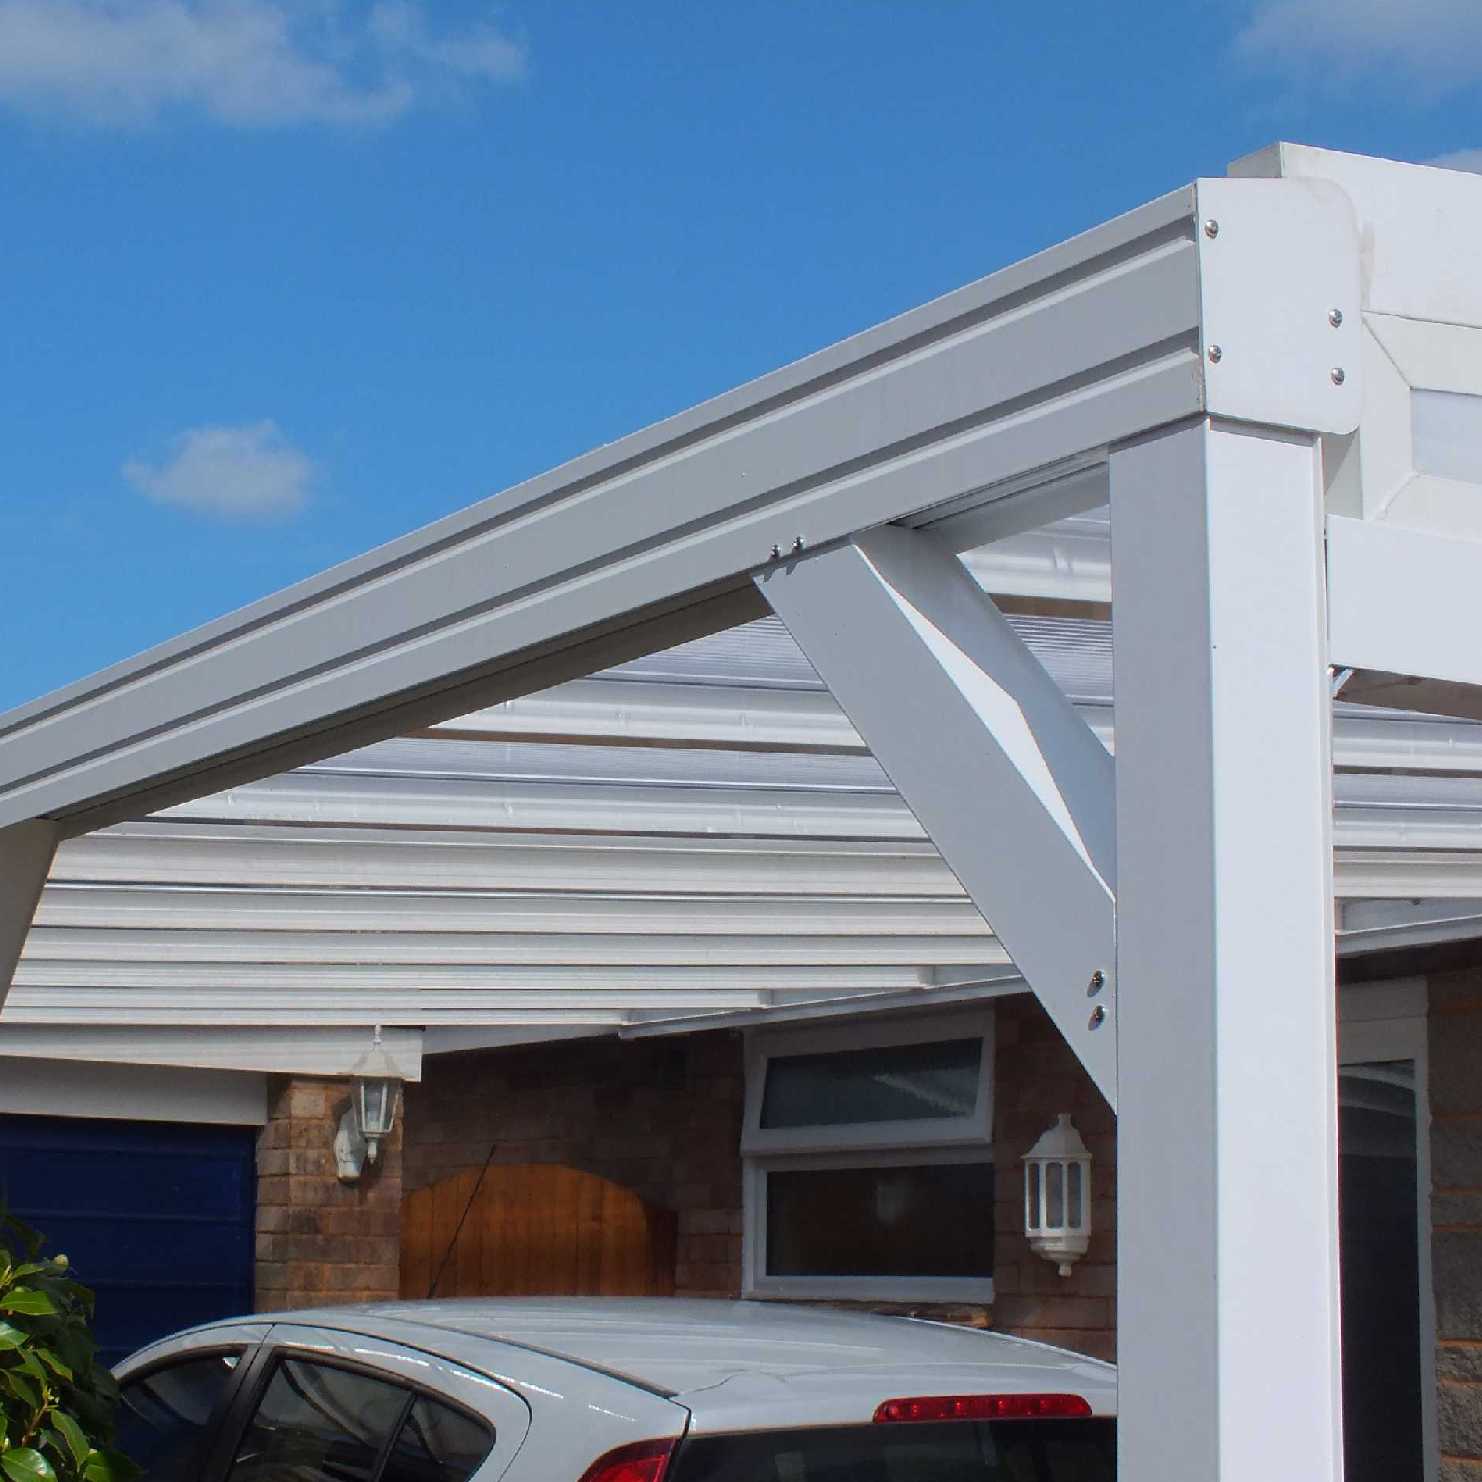 Great deals on Omega Smart Lean-To Canopy, White with 16mm Polycarbonate Glazing - 5.2m (W) x 2.5m (P), (3) Supporting Posts